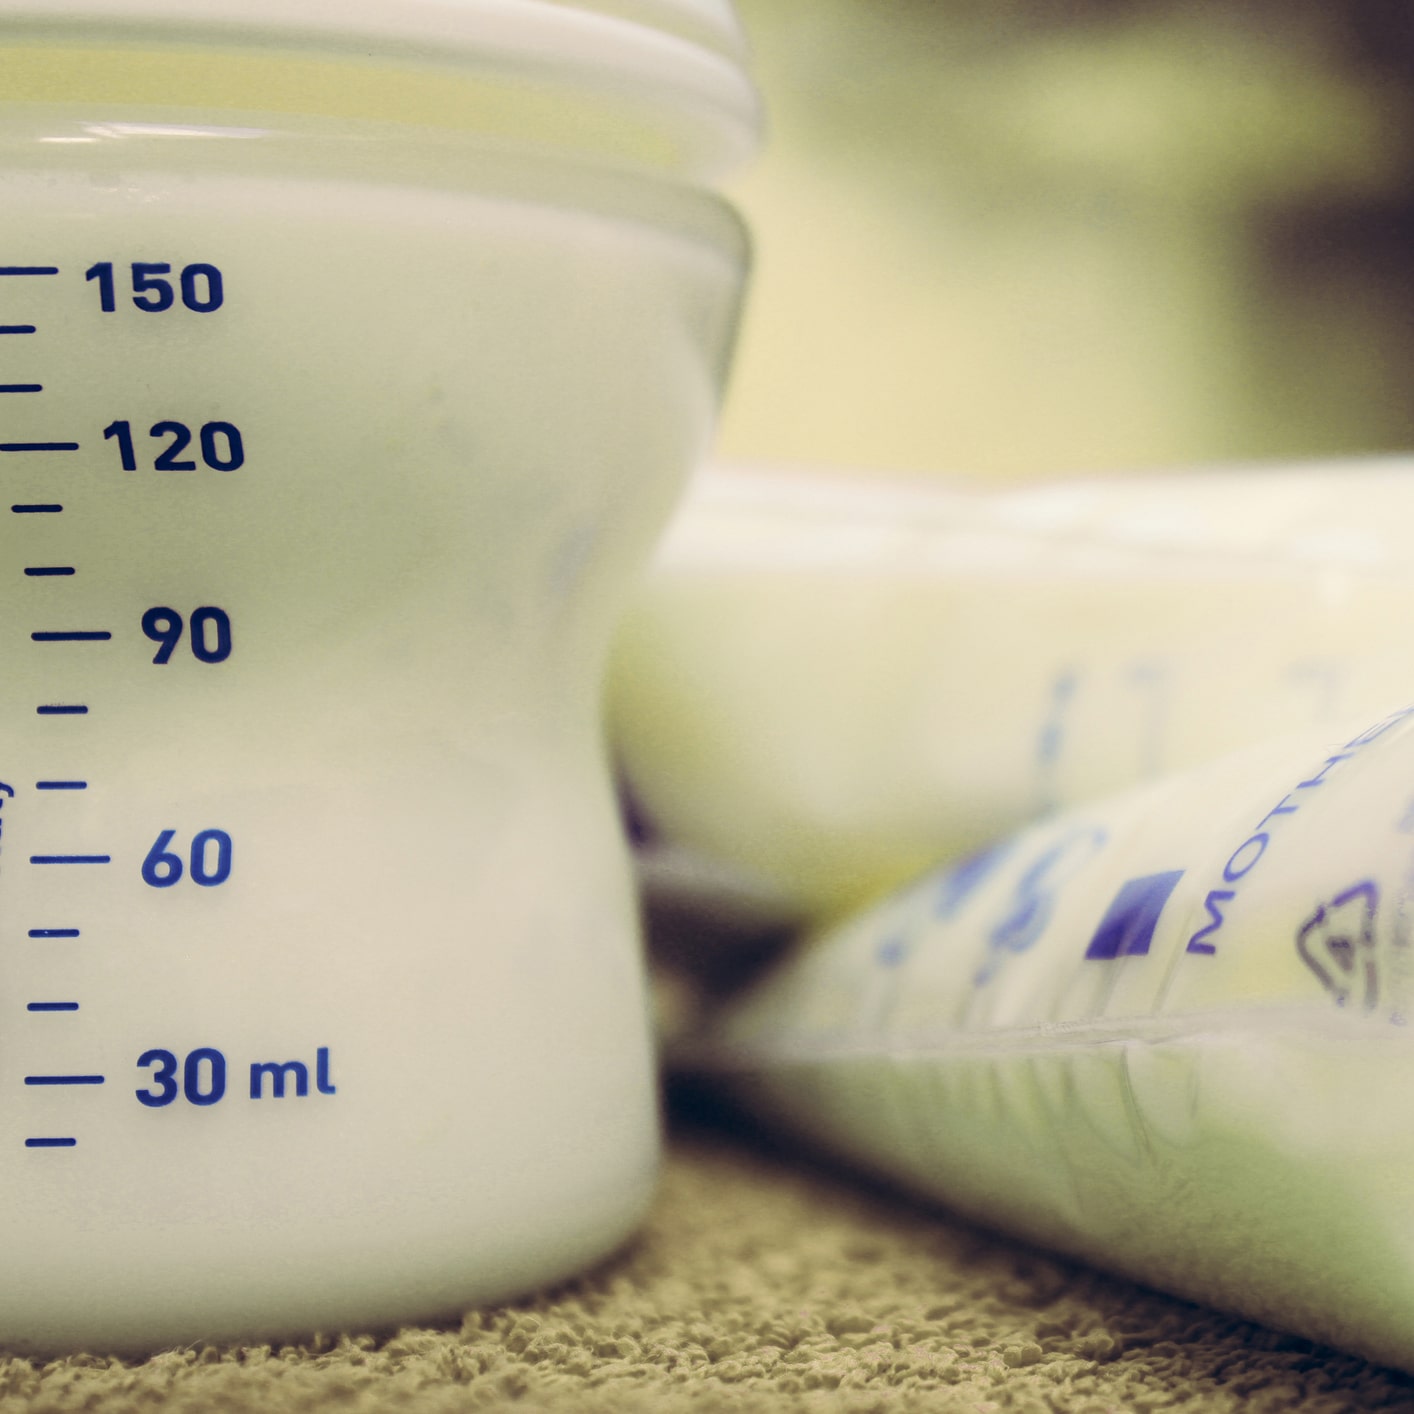 baby bottle filed with breast milk and storage bags with frozen breastmilk, breastfeeding concept